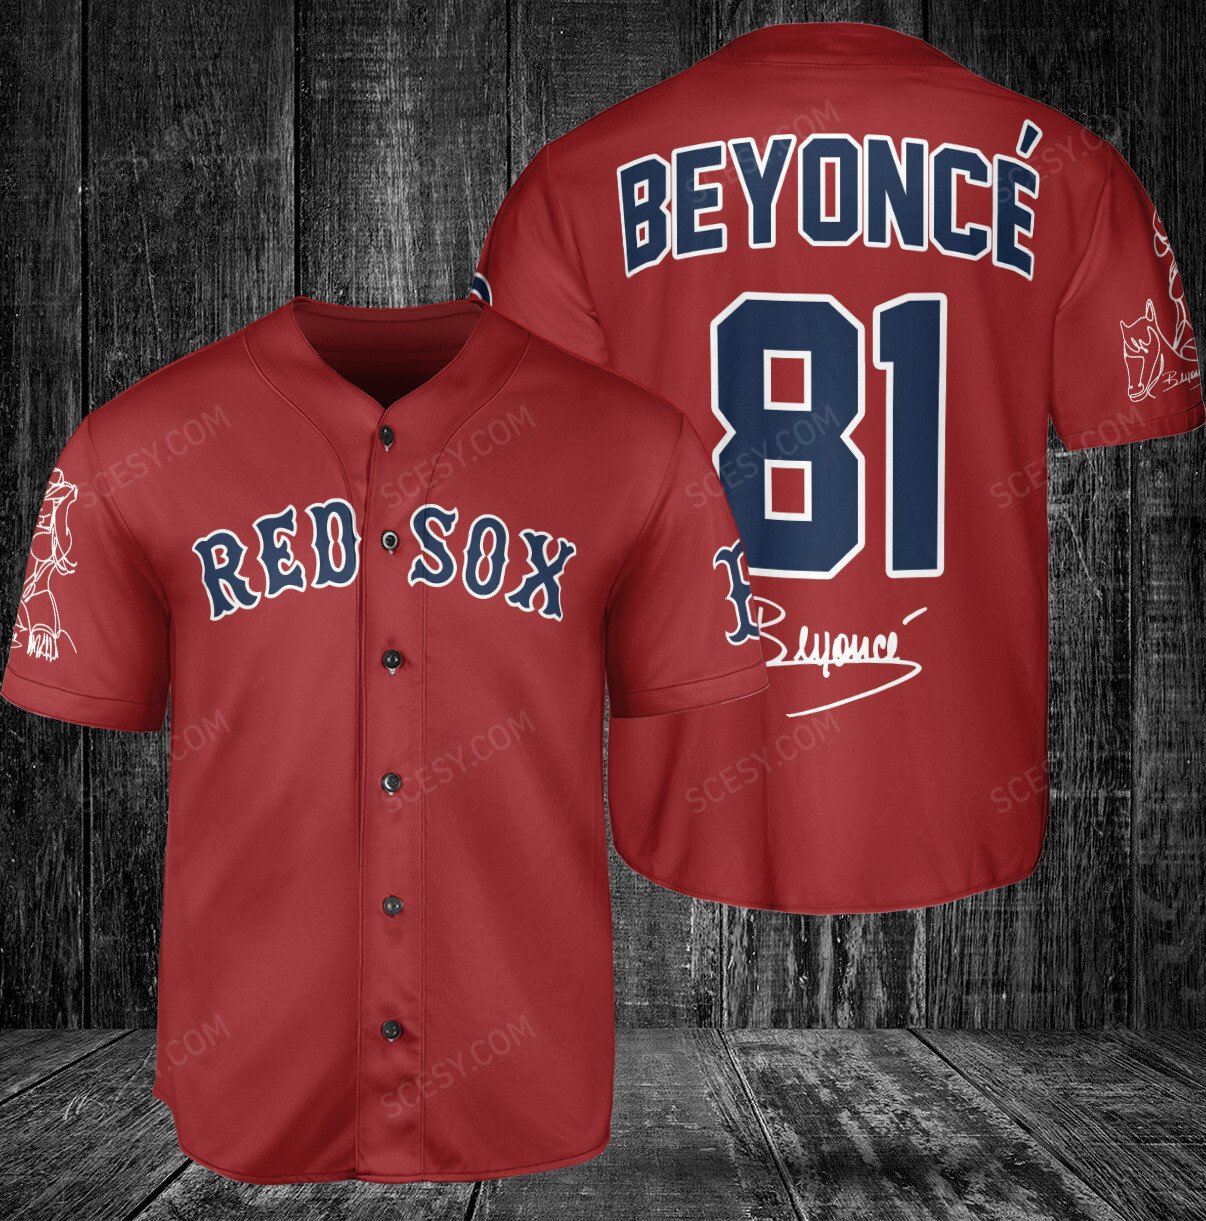 red sox jersey font